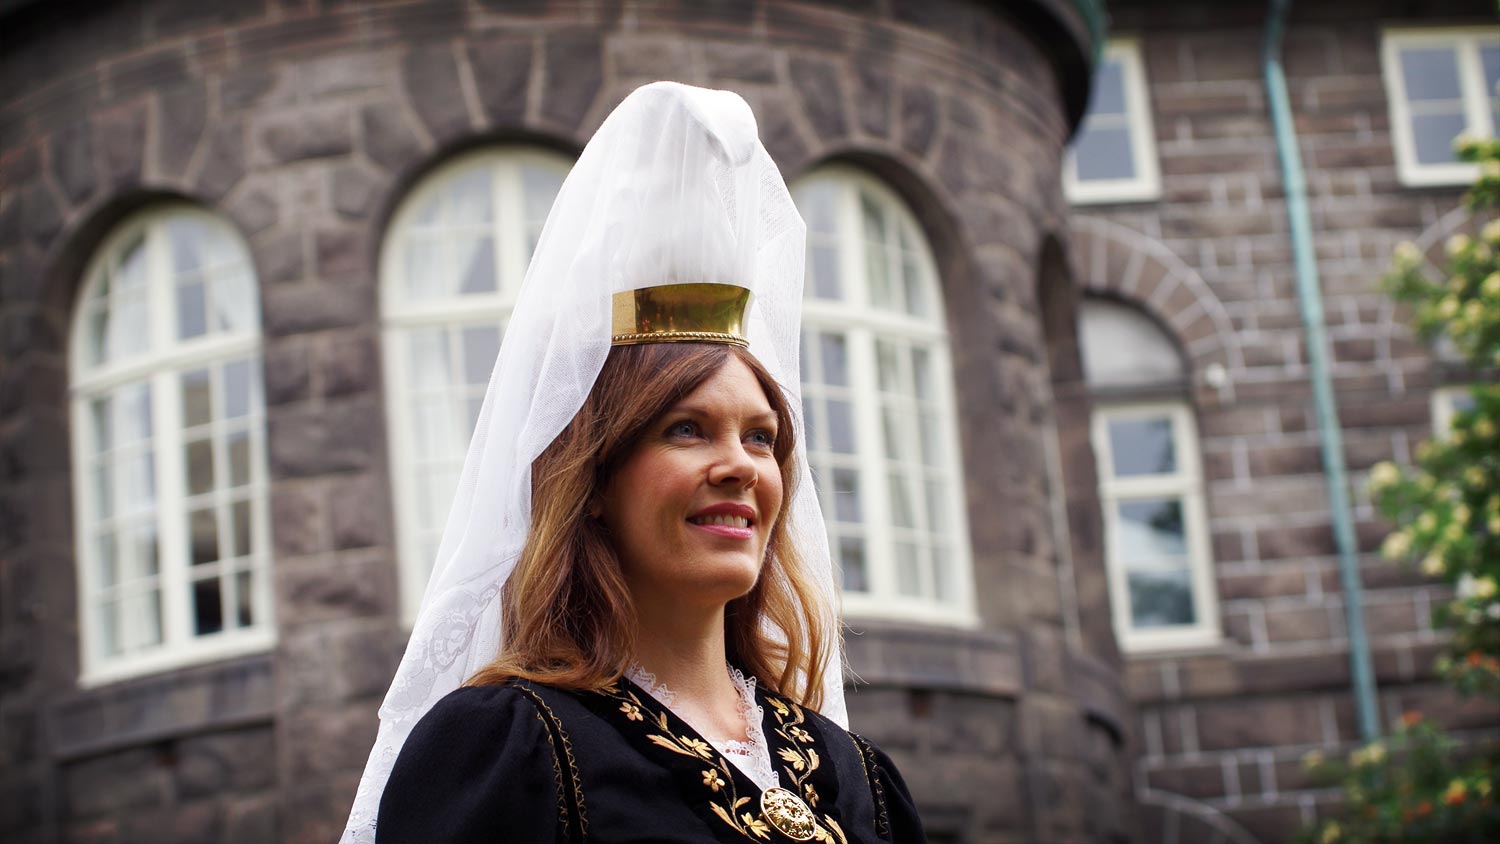 A portrait of a young woman wearing a dress with high headdress and tiara; a veil falling to her shoulders. She is the Mountain Woman on the National Day, Mountain Woman being the symbol for Iceland. In the background is the parliament house.